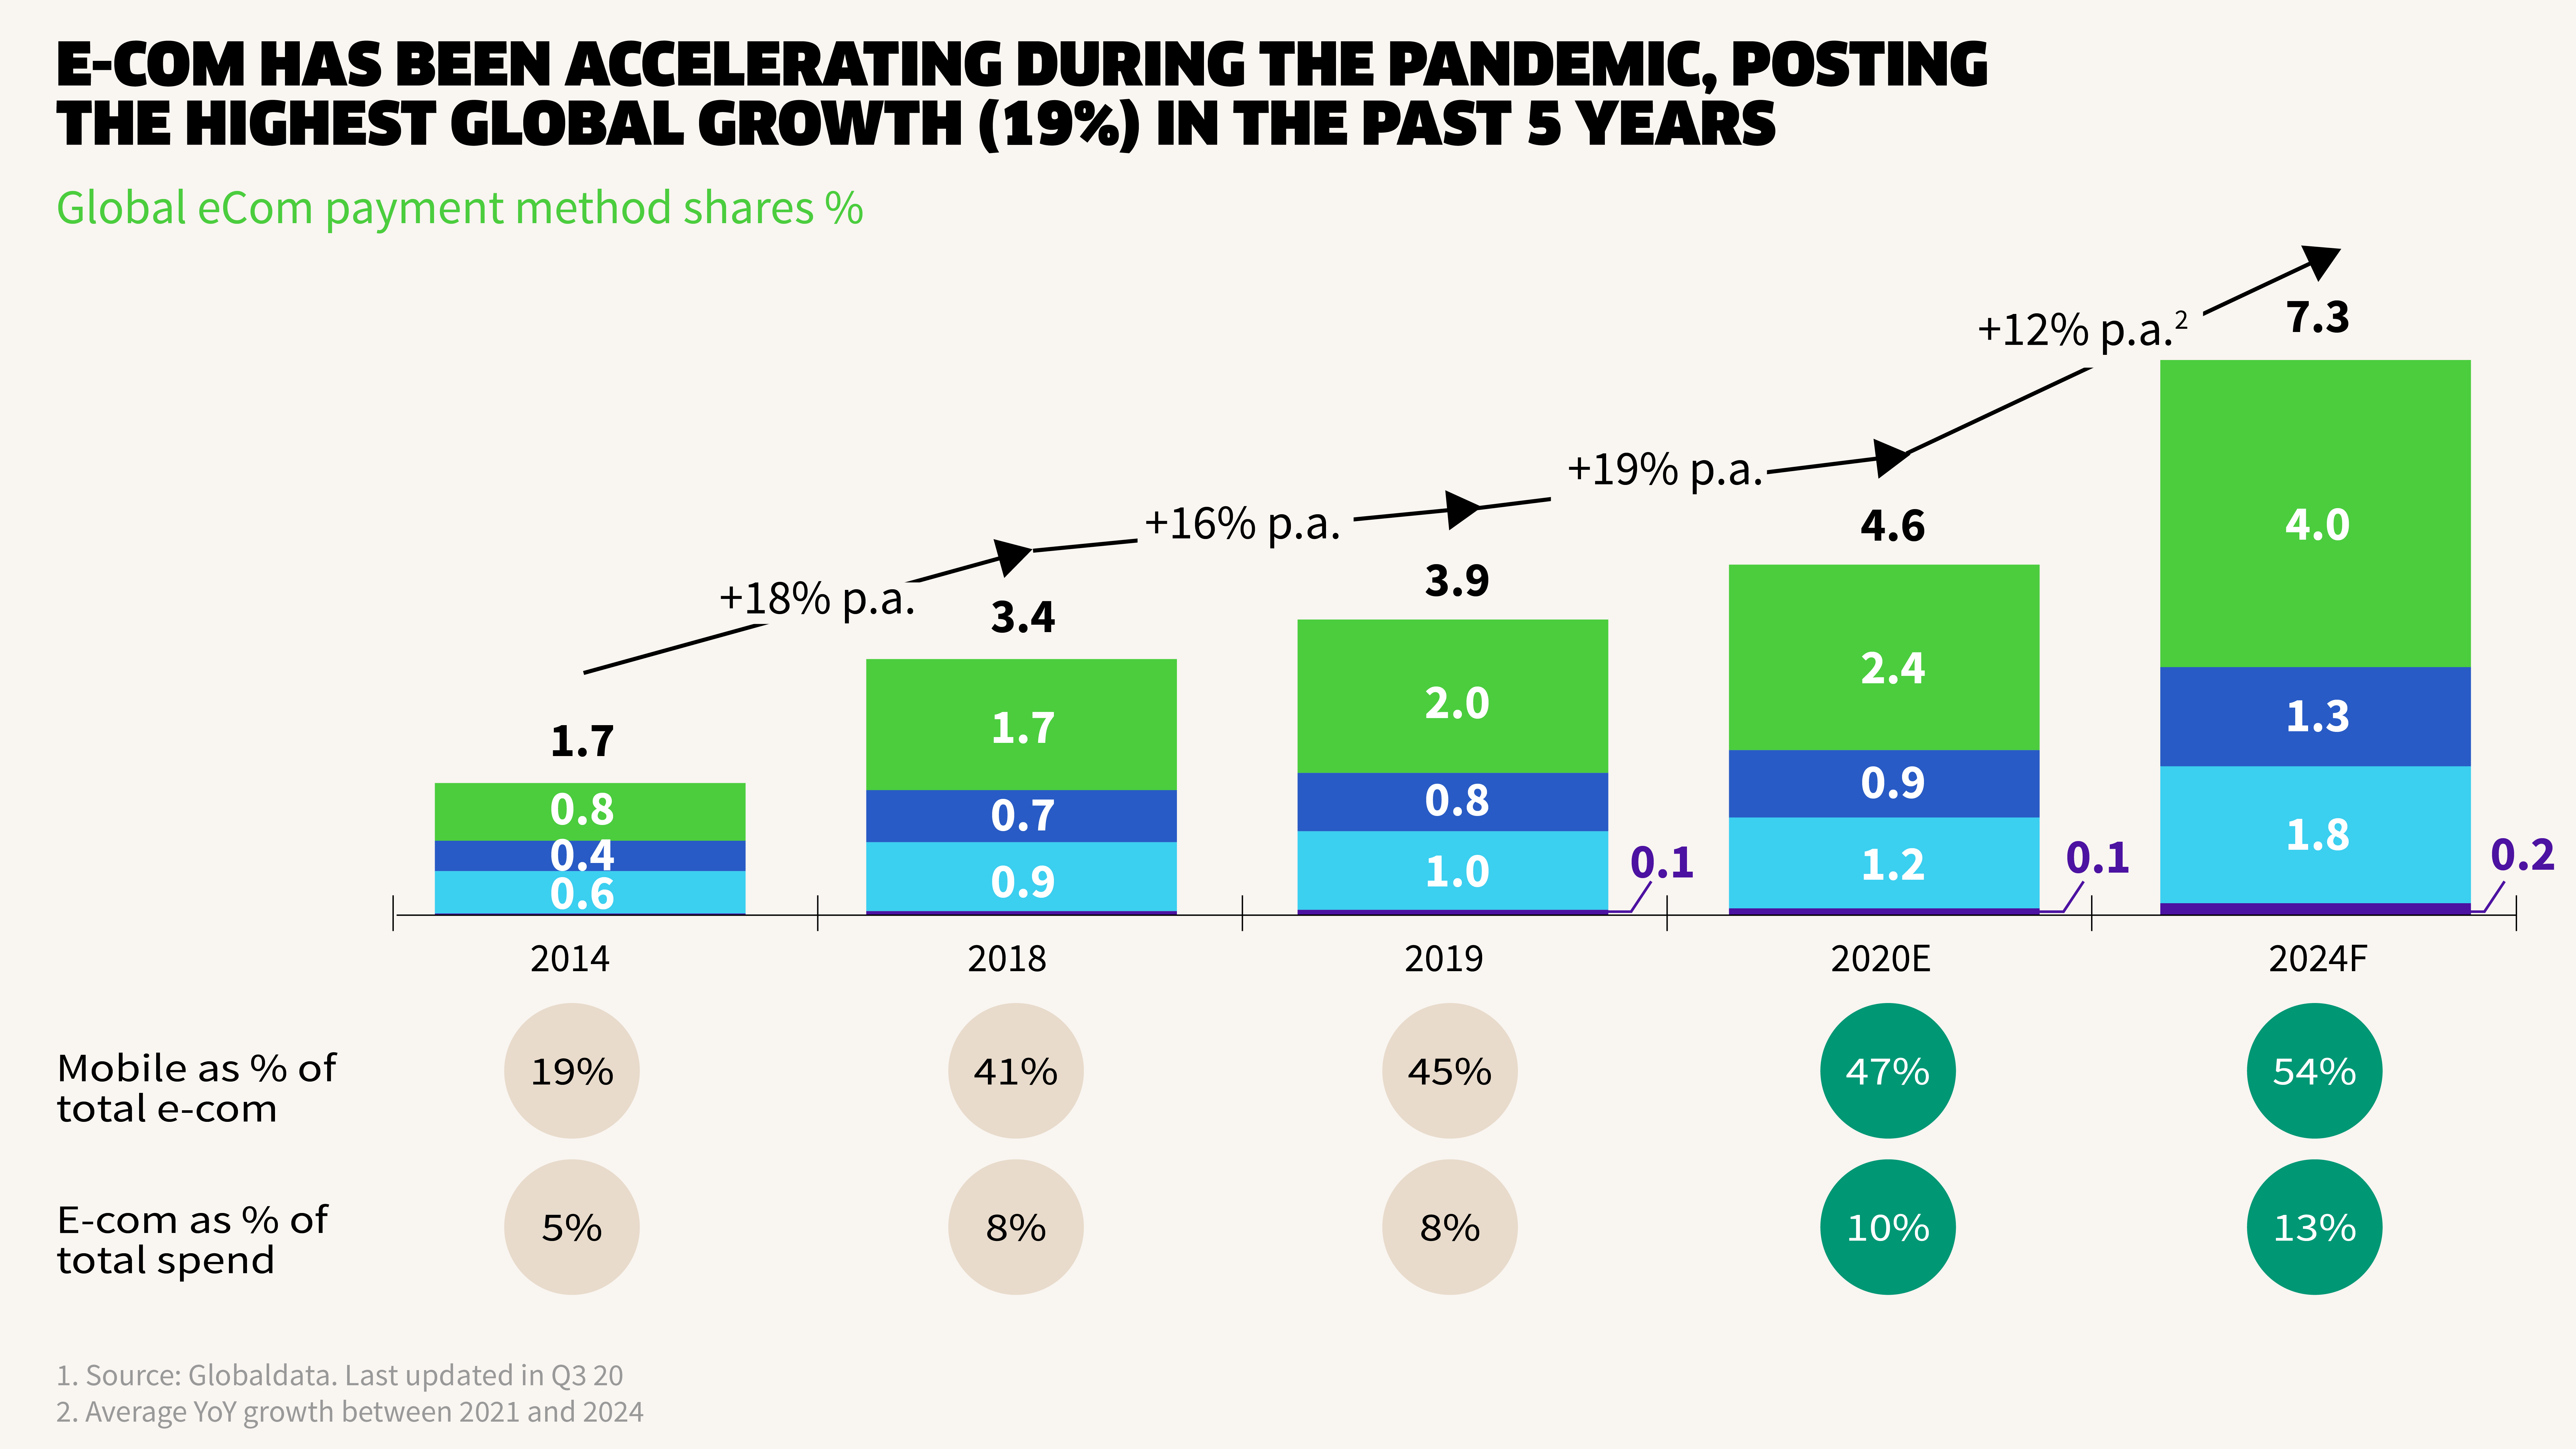 E-com has been accelerating during the pandemic, posting the highest global growth (19%) in the past 5 years